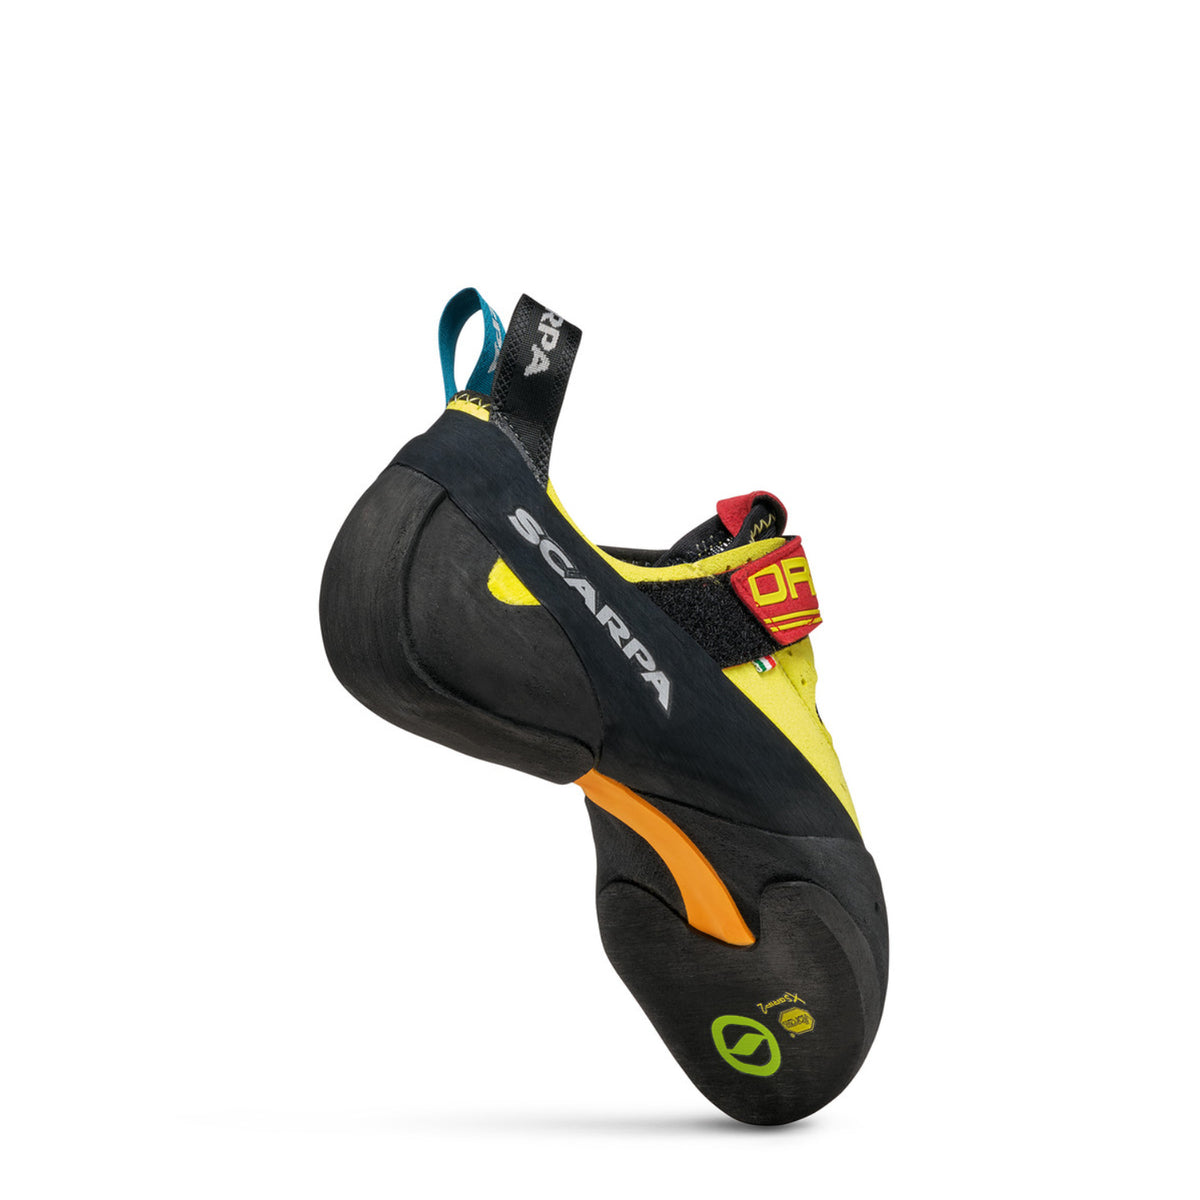 Scarpa Drago climbing shoe, in black and yellow colours